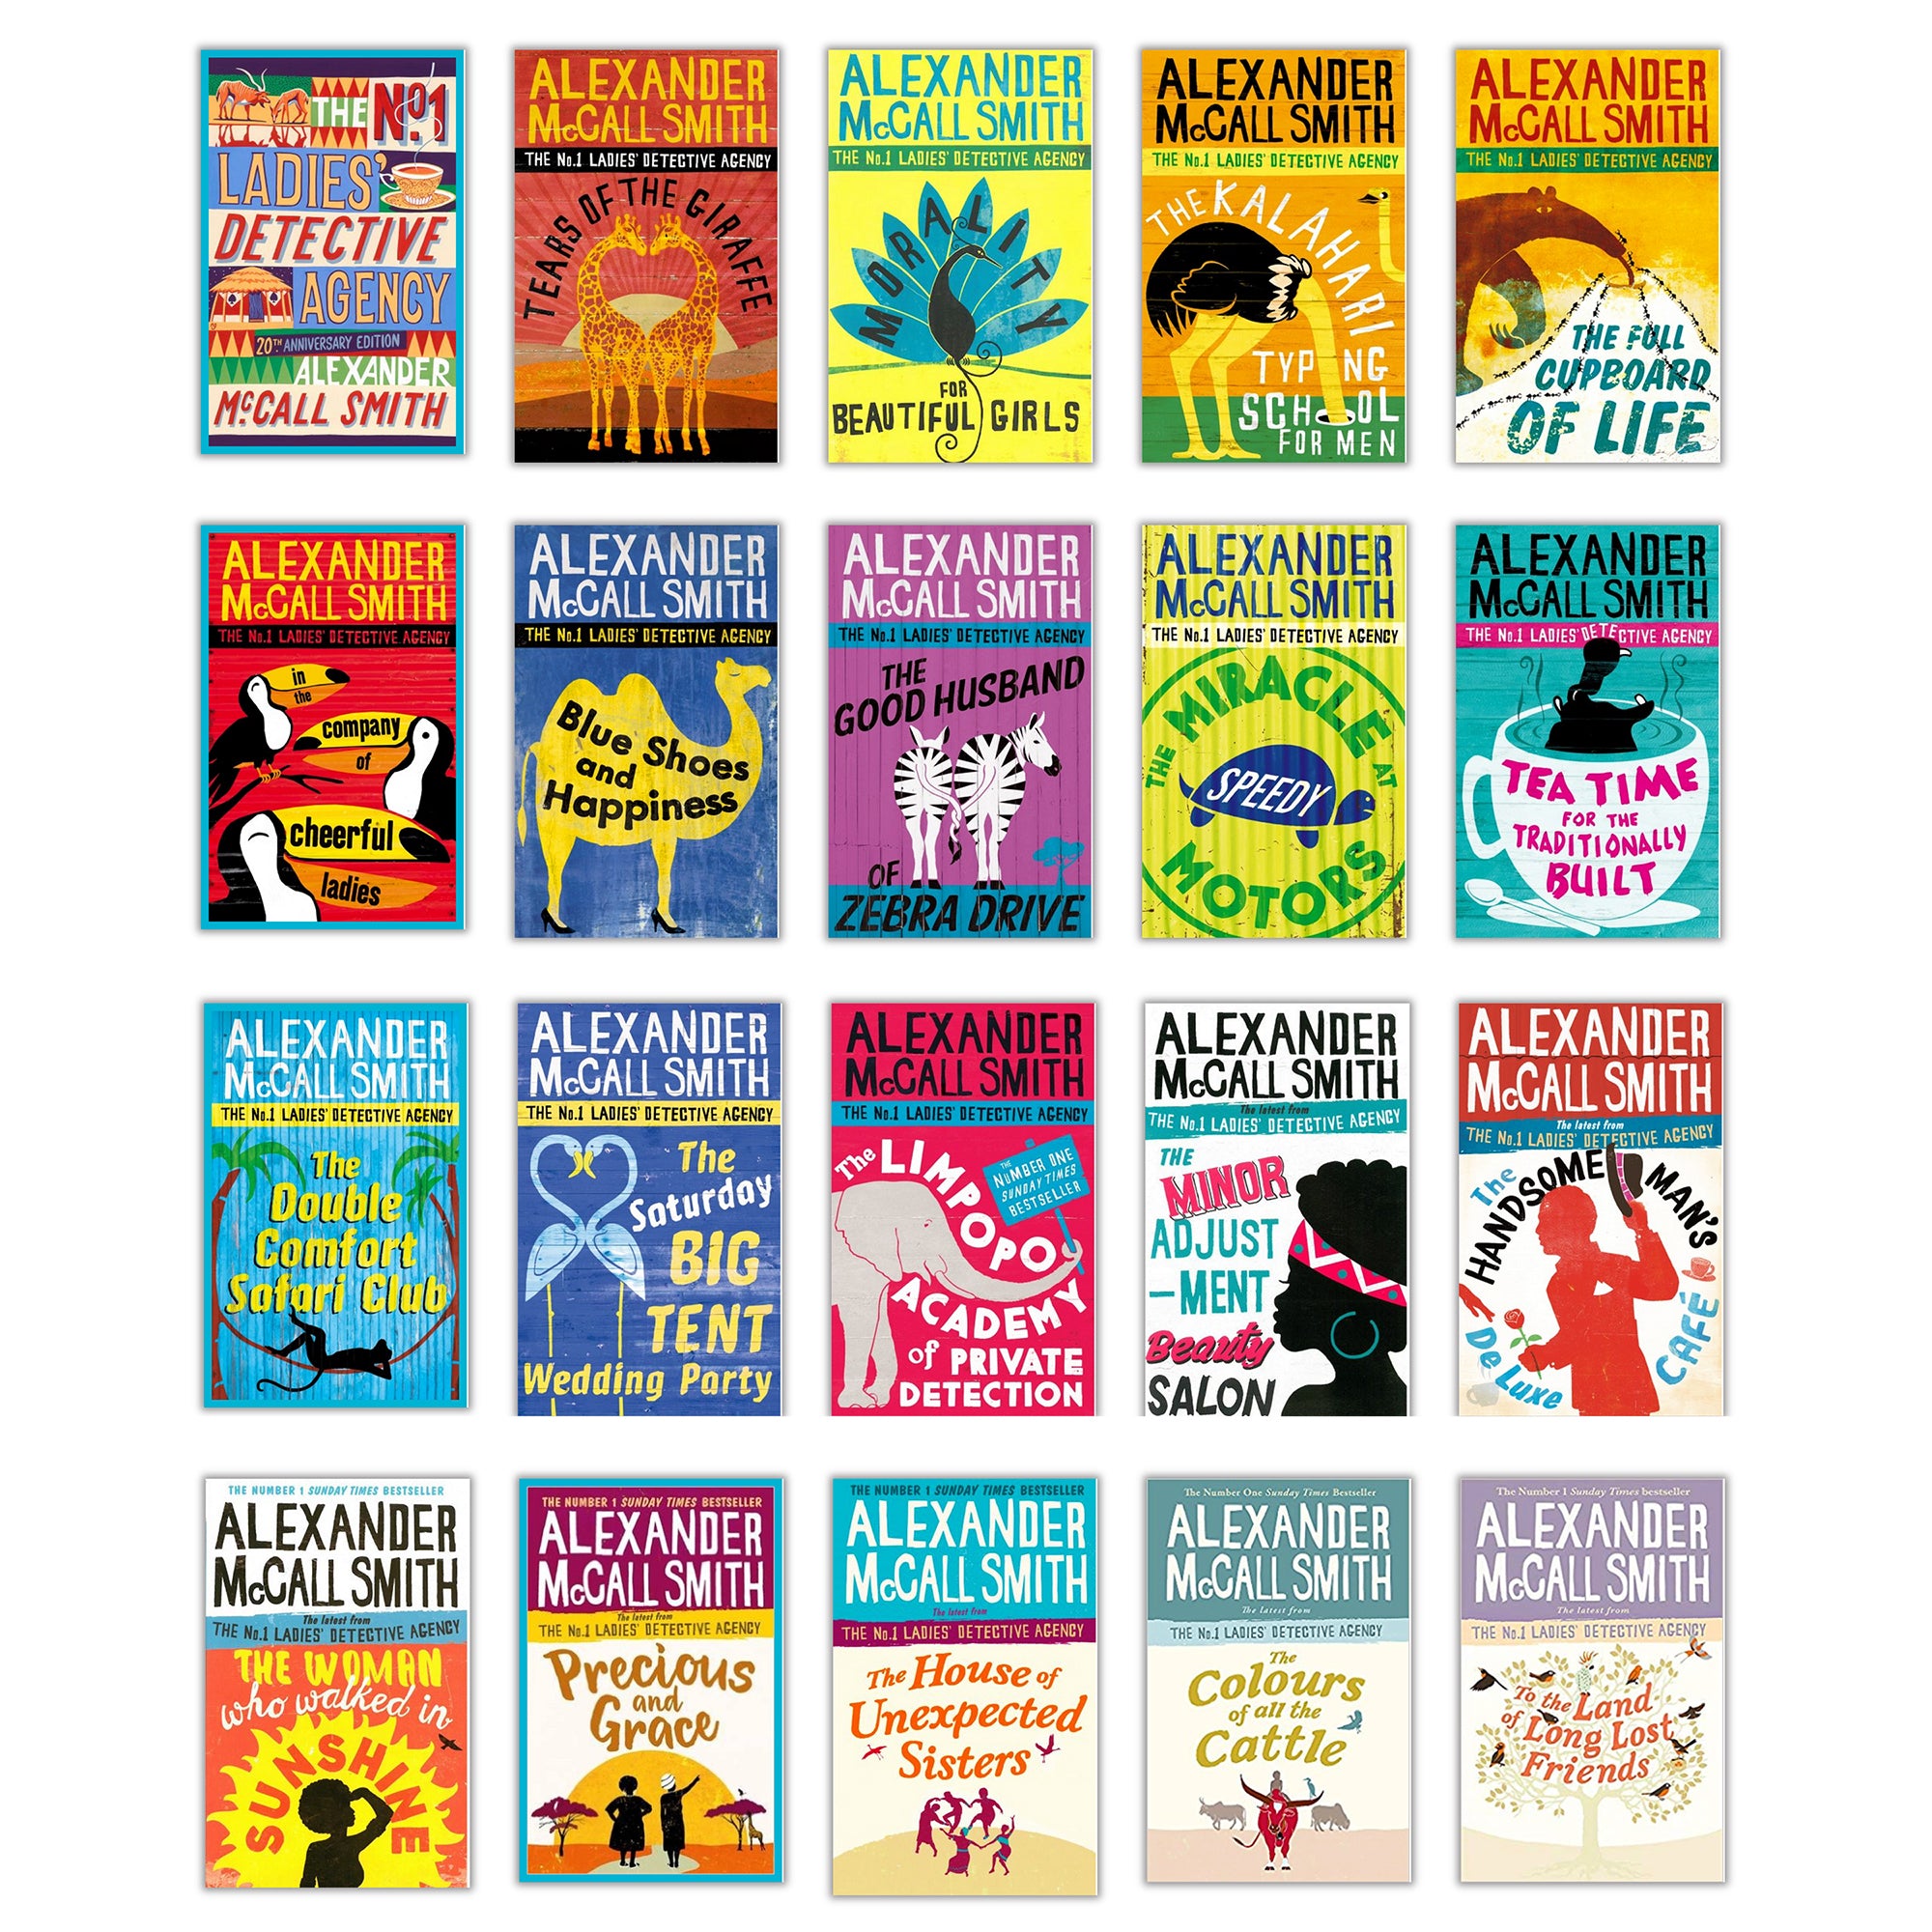 Safari Journal / Blog by Safari Fusion | The No.1 Ladies' Detective Agency book series by Alexander McCall Smith / Titles 1 to 20